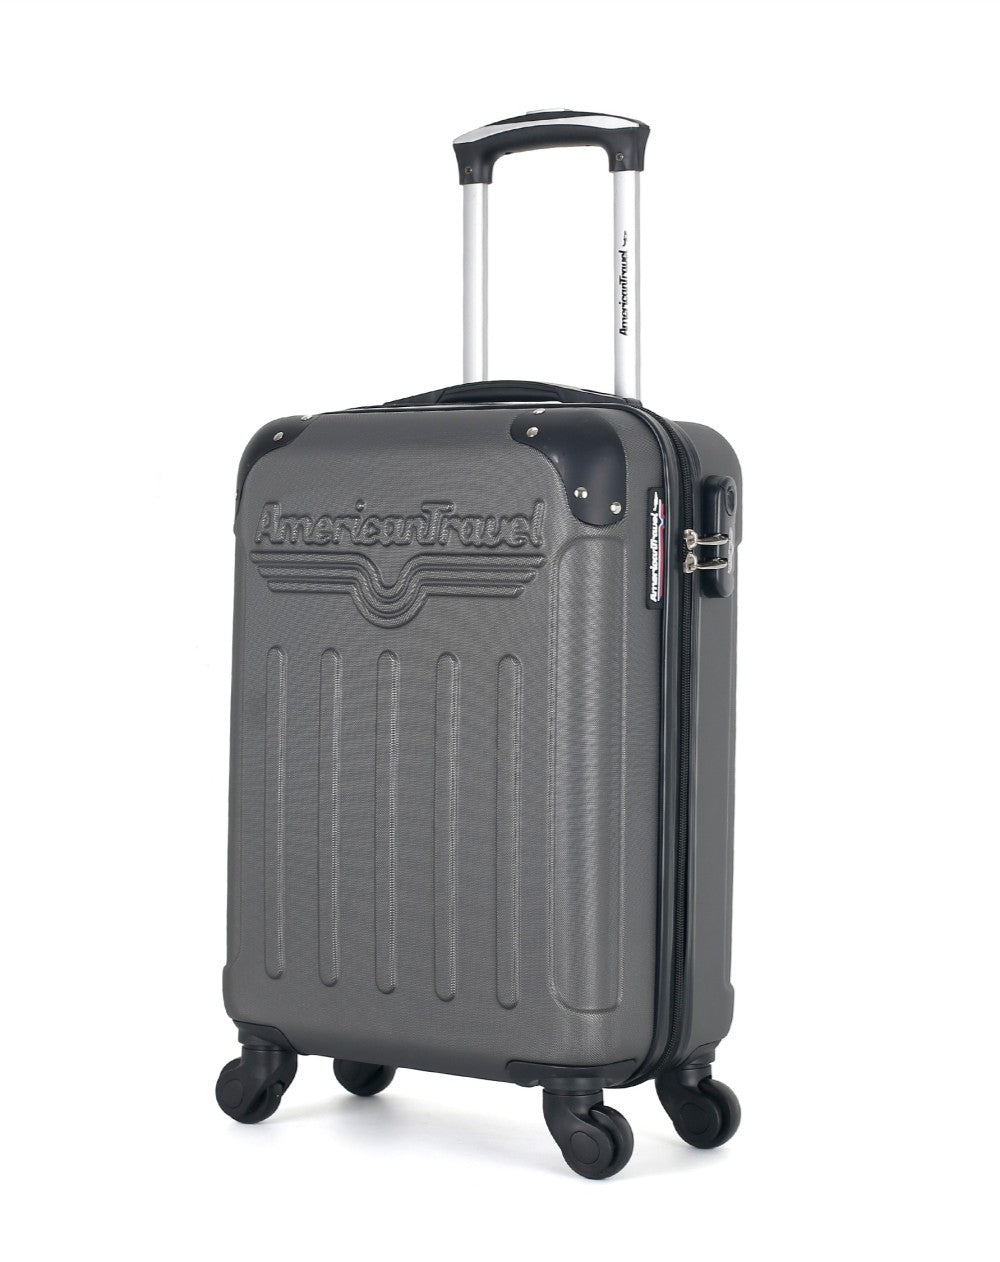 Valise Cabine ABS HARLEM-E 4 Roues 50 cm